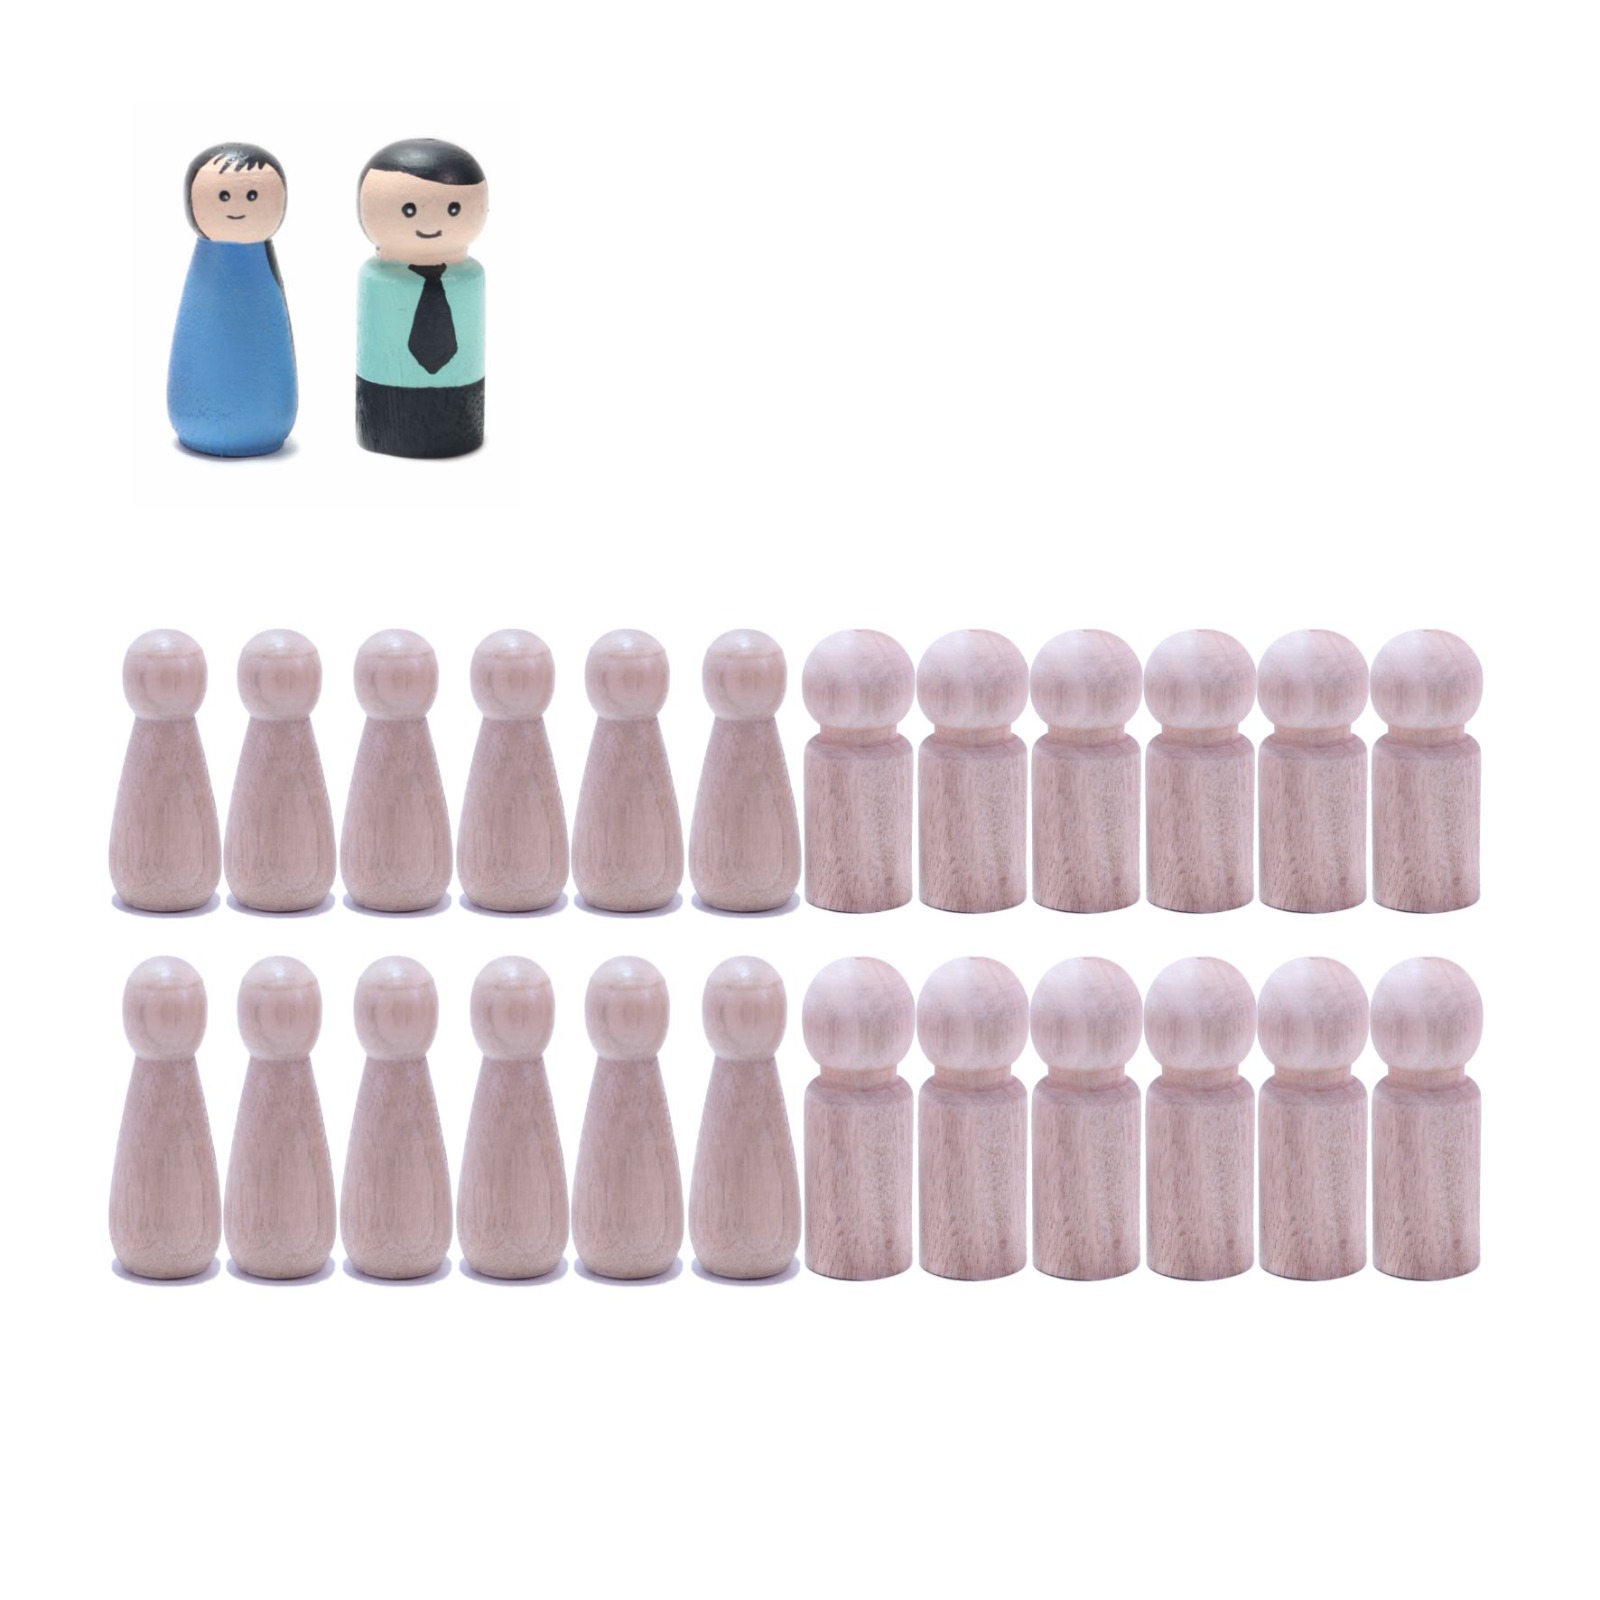 Wooden Peg Doll Unfinished Wooden People Plain Blank Bodies Angel Dolls for DIY Craft Pack of 20, Brown